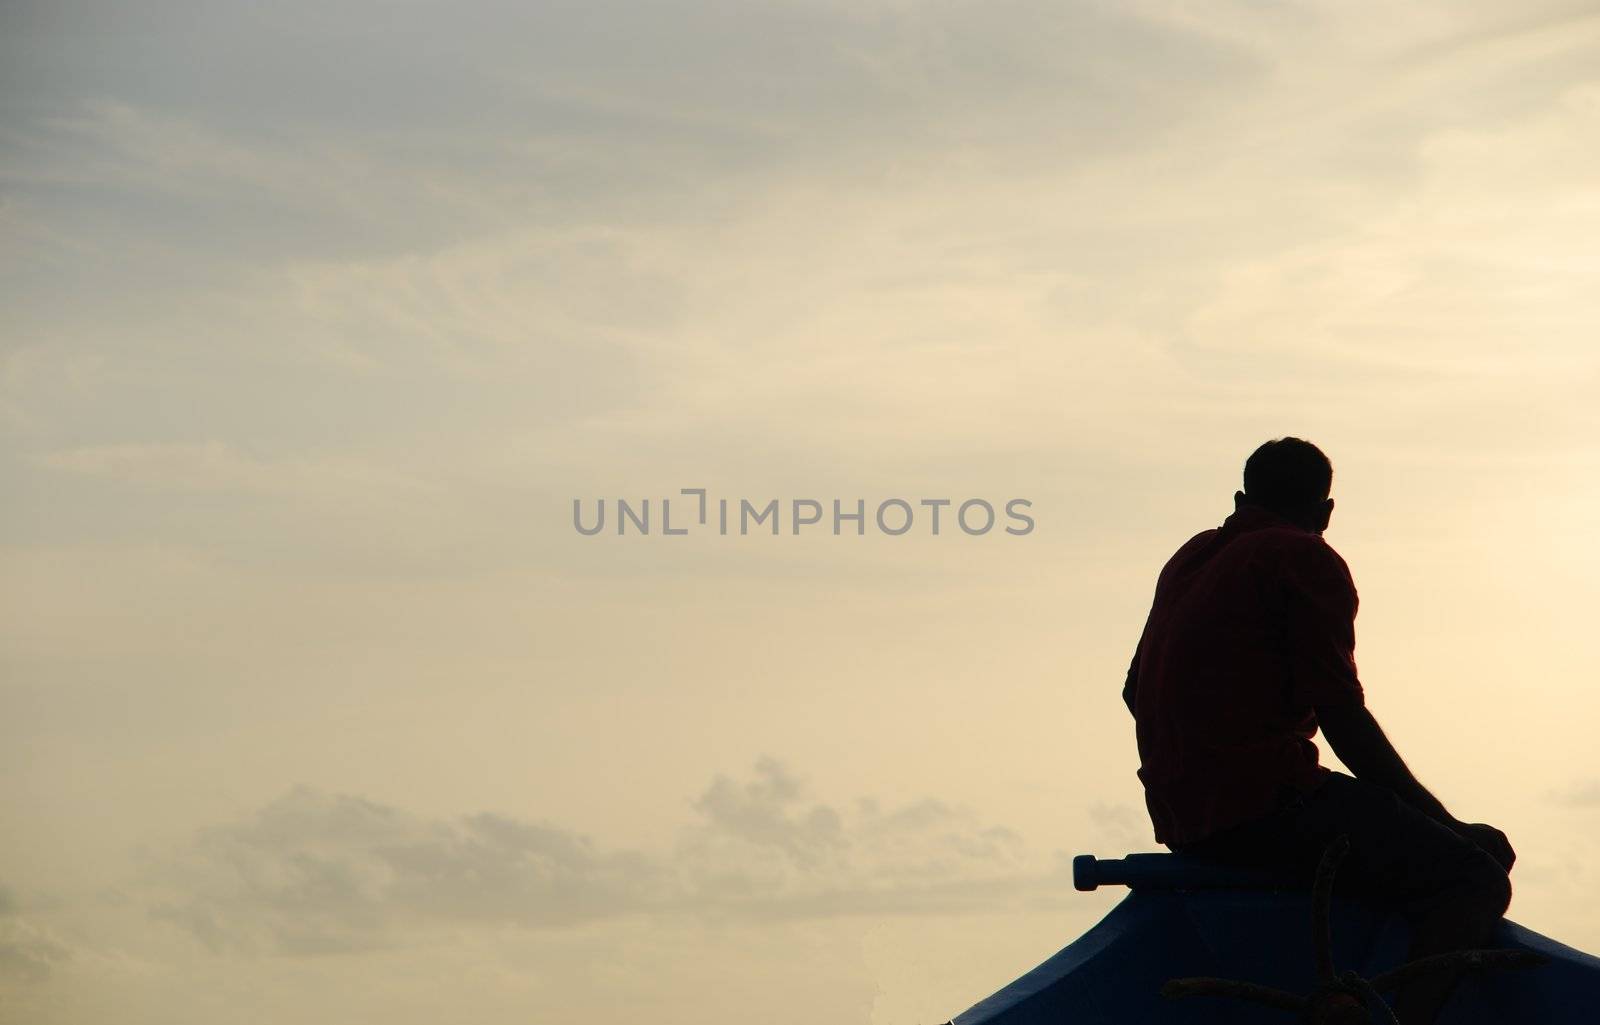 beautiful silhouette of a fisherman and dhoni fishing boat in Maldives during sunset